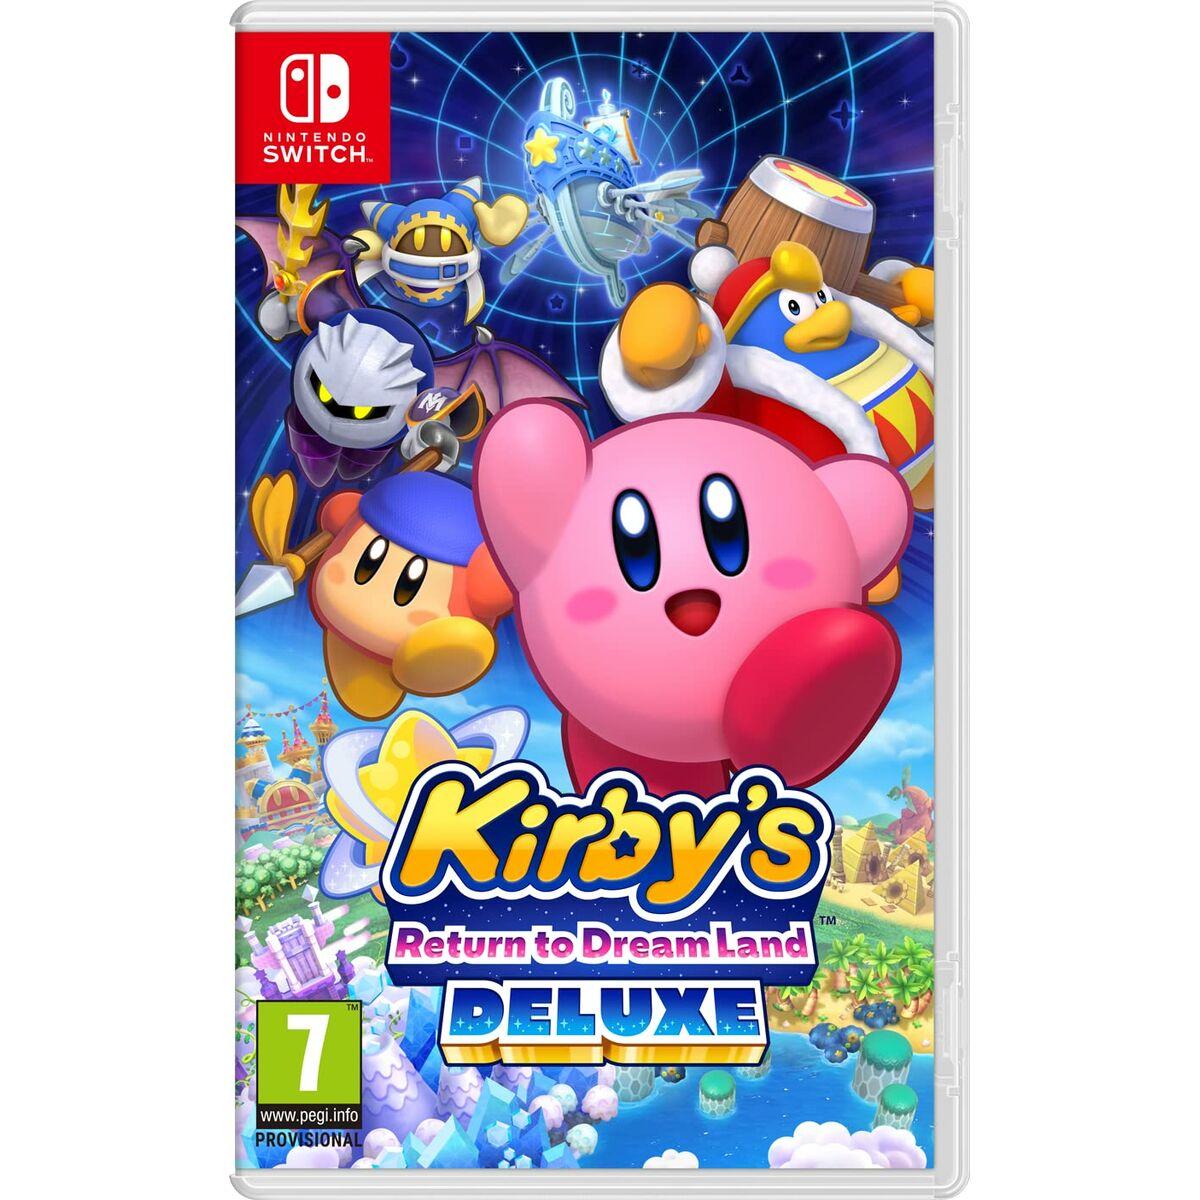 Electronique Video game for Switch Nintendo Kirby's Return to Dream Land Deluxe